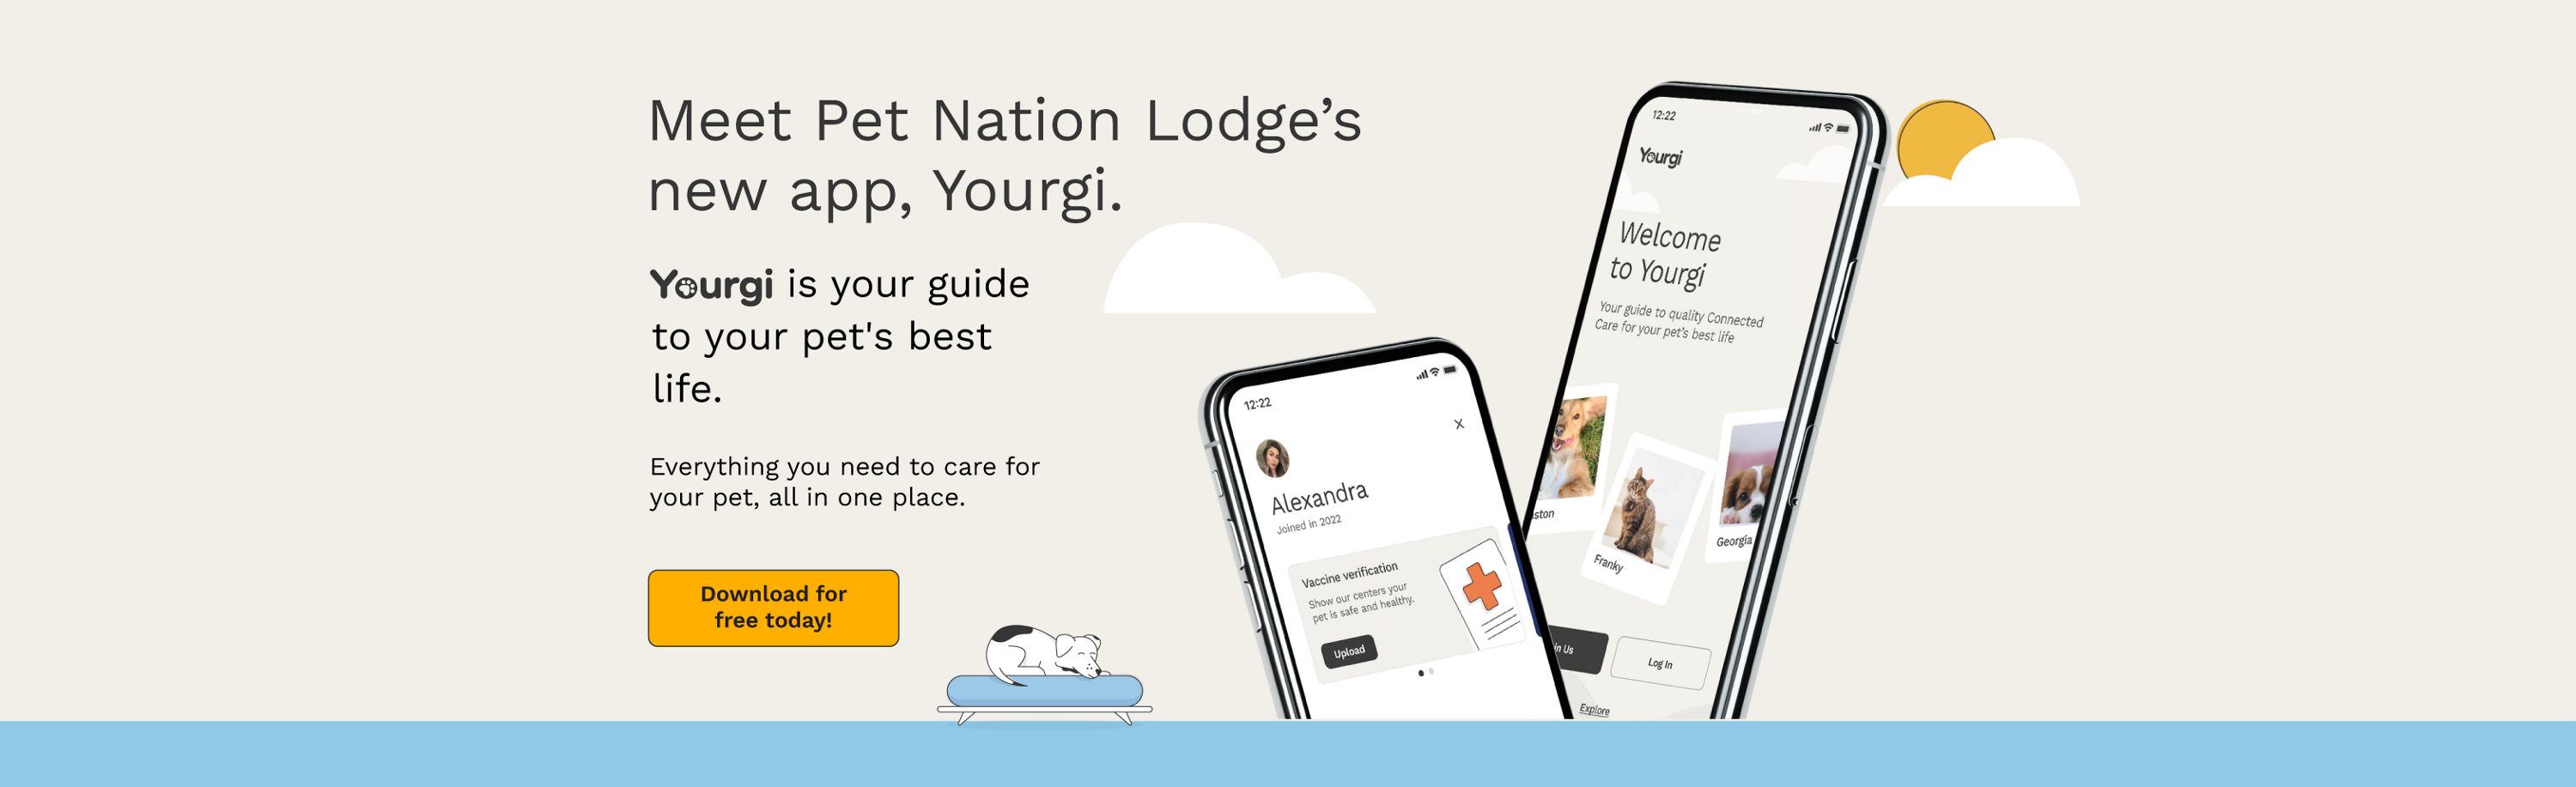 Meet Pet Nation Lodge's new app, Yourgi.